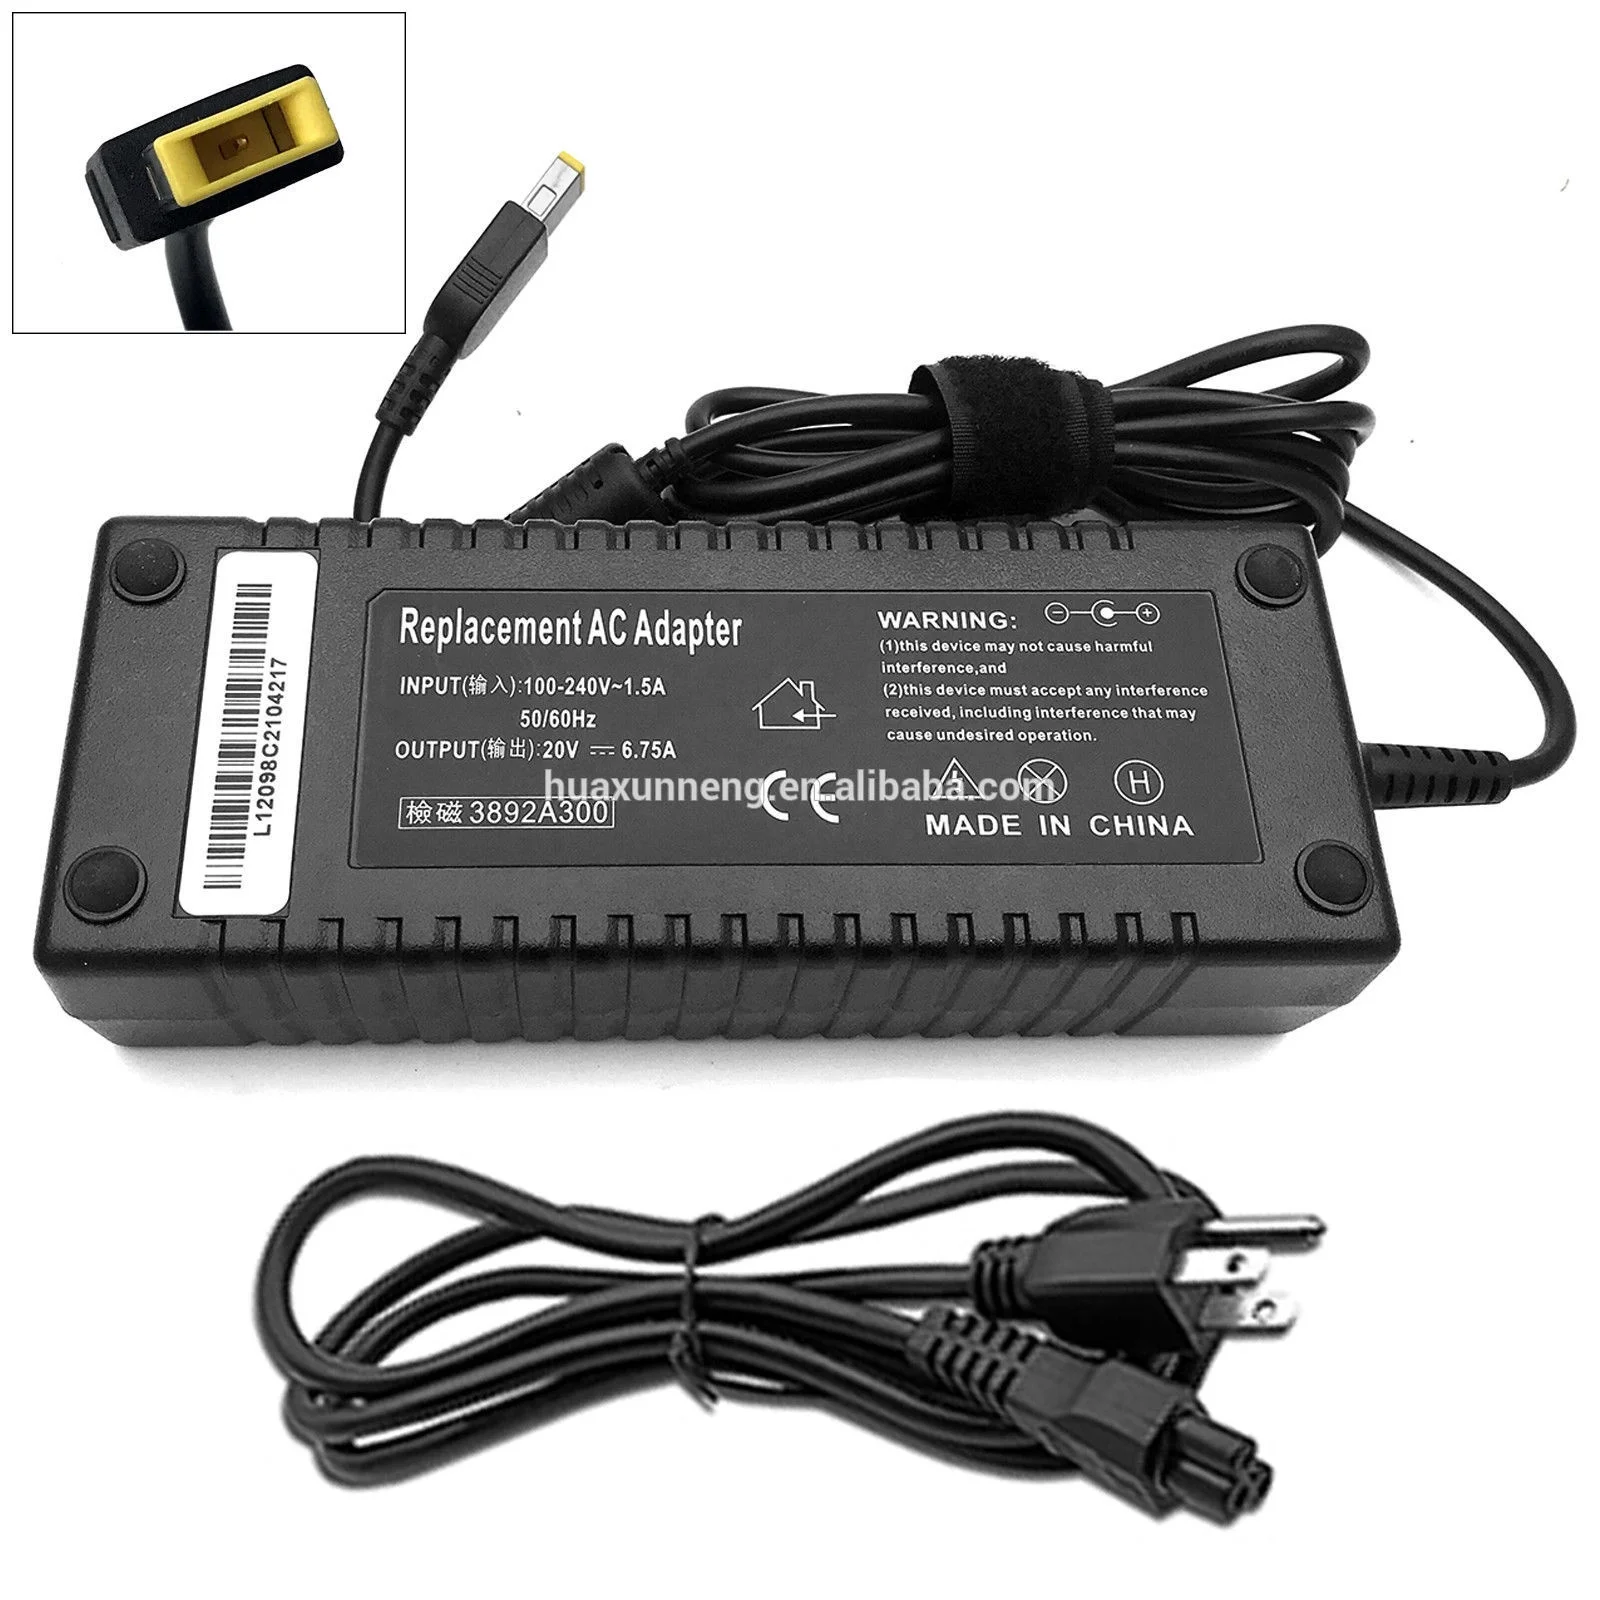 

135W 20V 6.75A Power Charger USB pin ac adapter forLenovo ThinkPad W510 W540 T440p T450p T460p T530 T540 T540p T560, Black